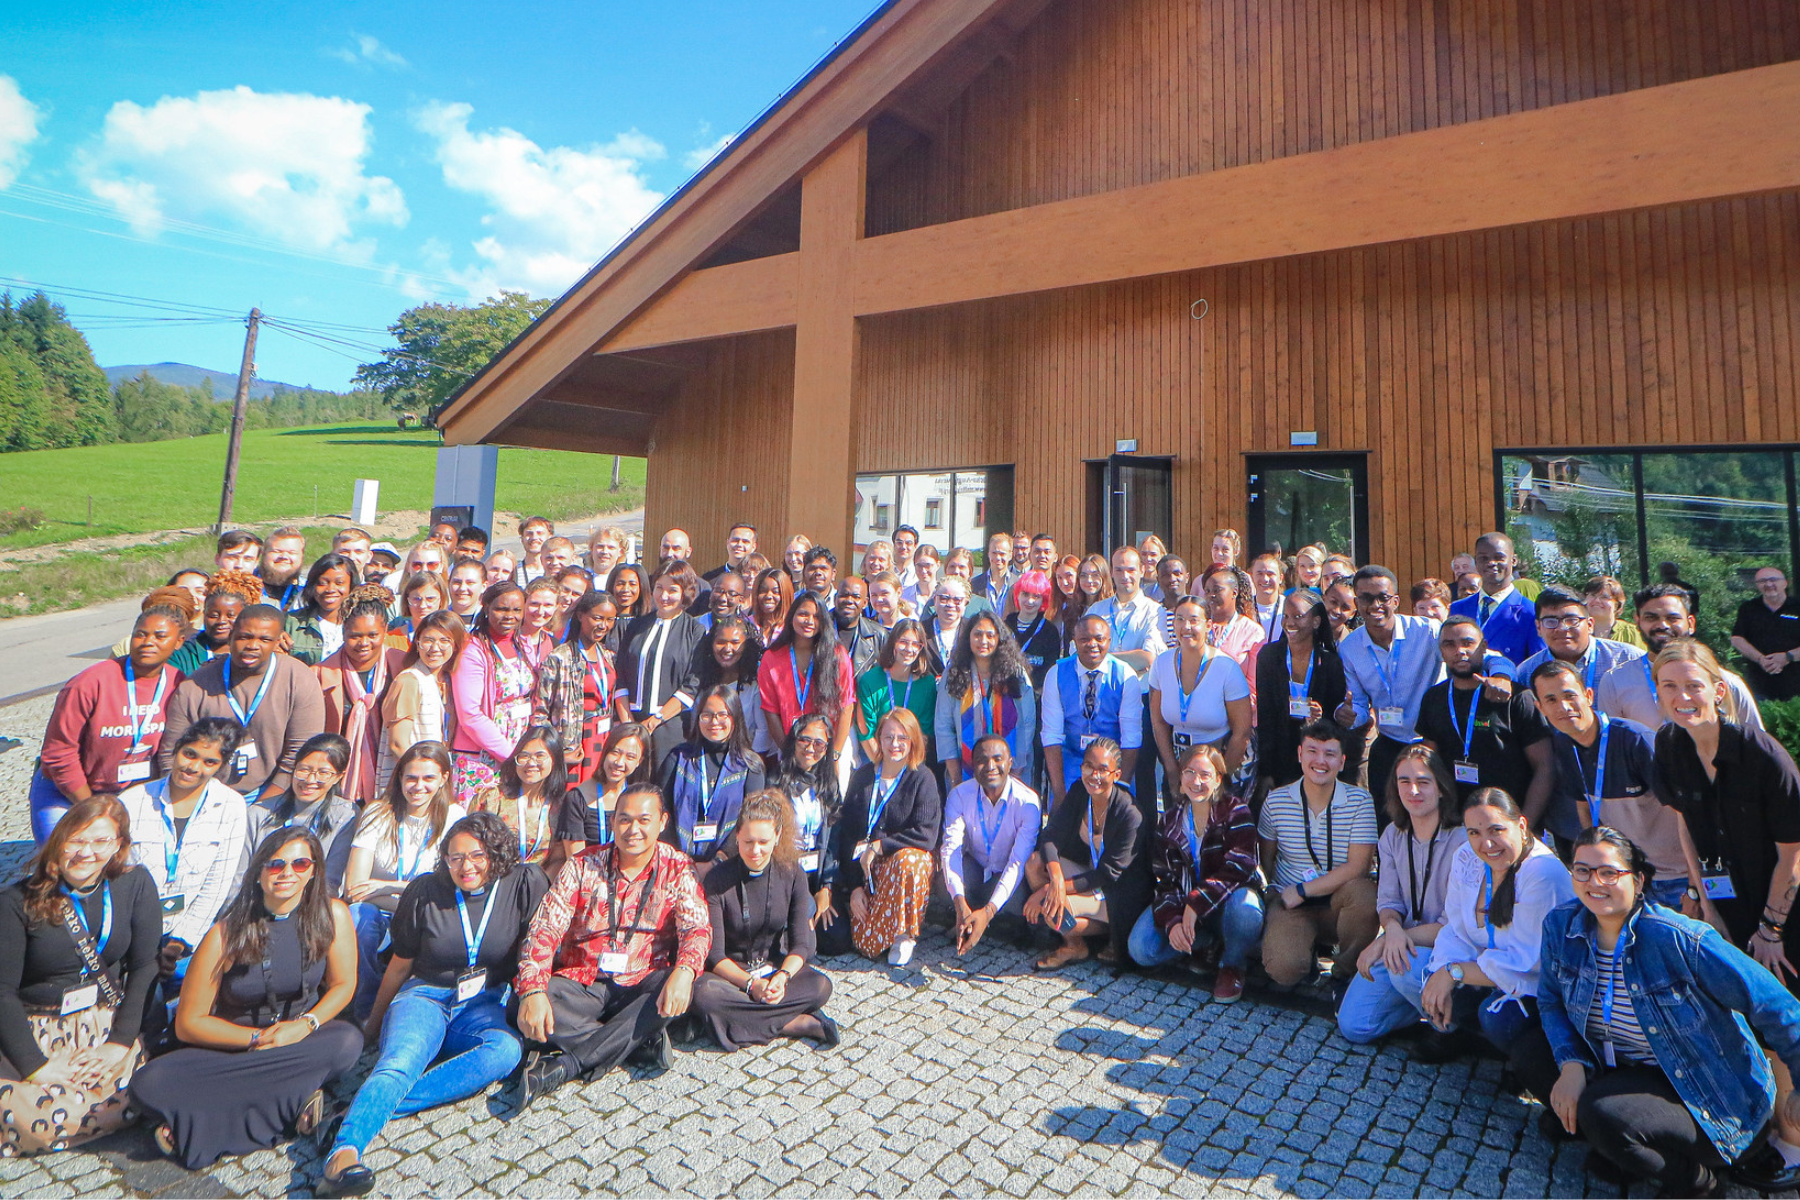 Over 100 participants in LWF Youth Pre-Assembly gather in Wisła Malinka, Poland ahead of the Thirteenth Assembly.